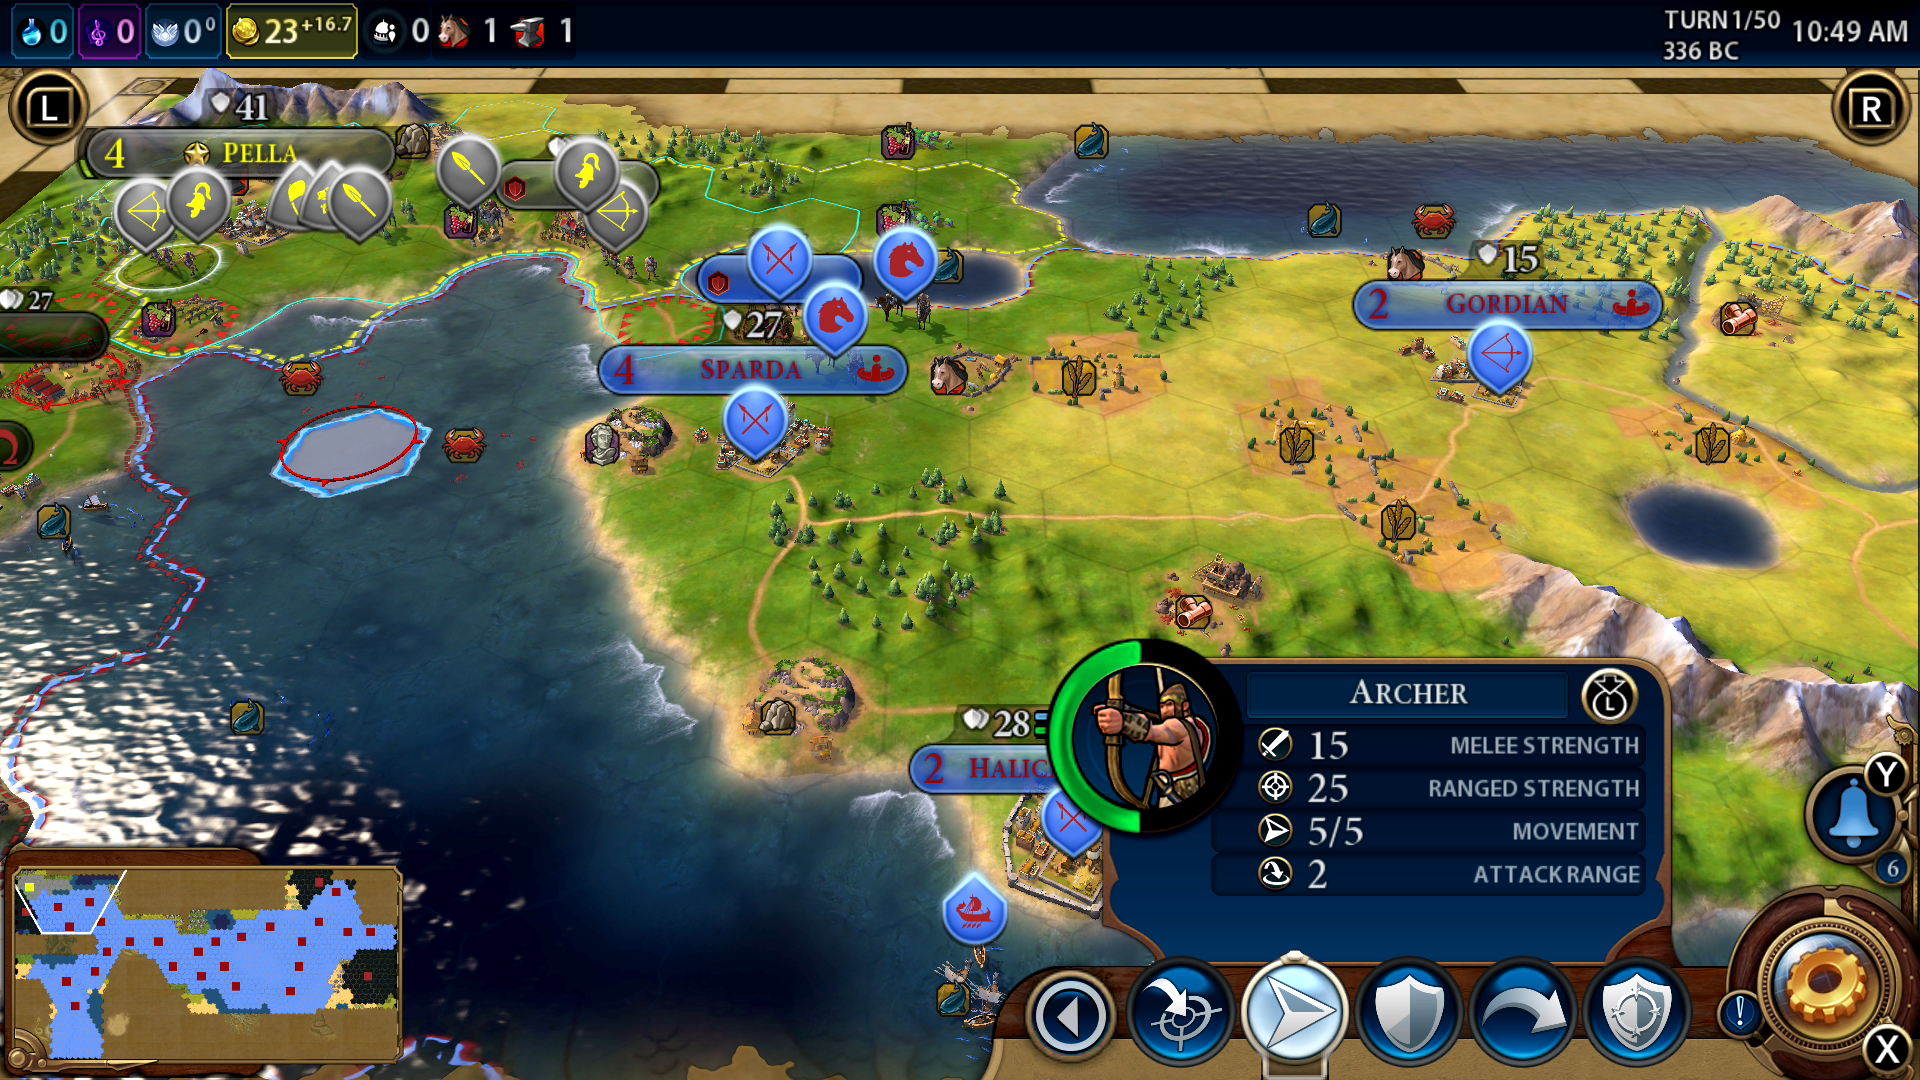 44 Awesome Is civ 6 switch local multiplayer Trend in This Years